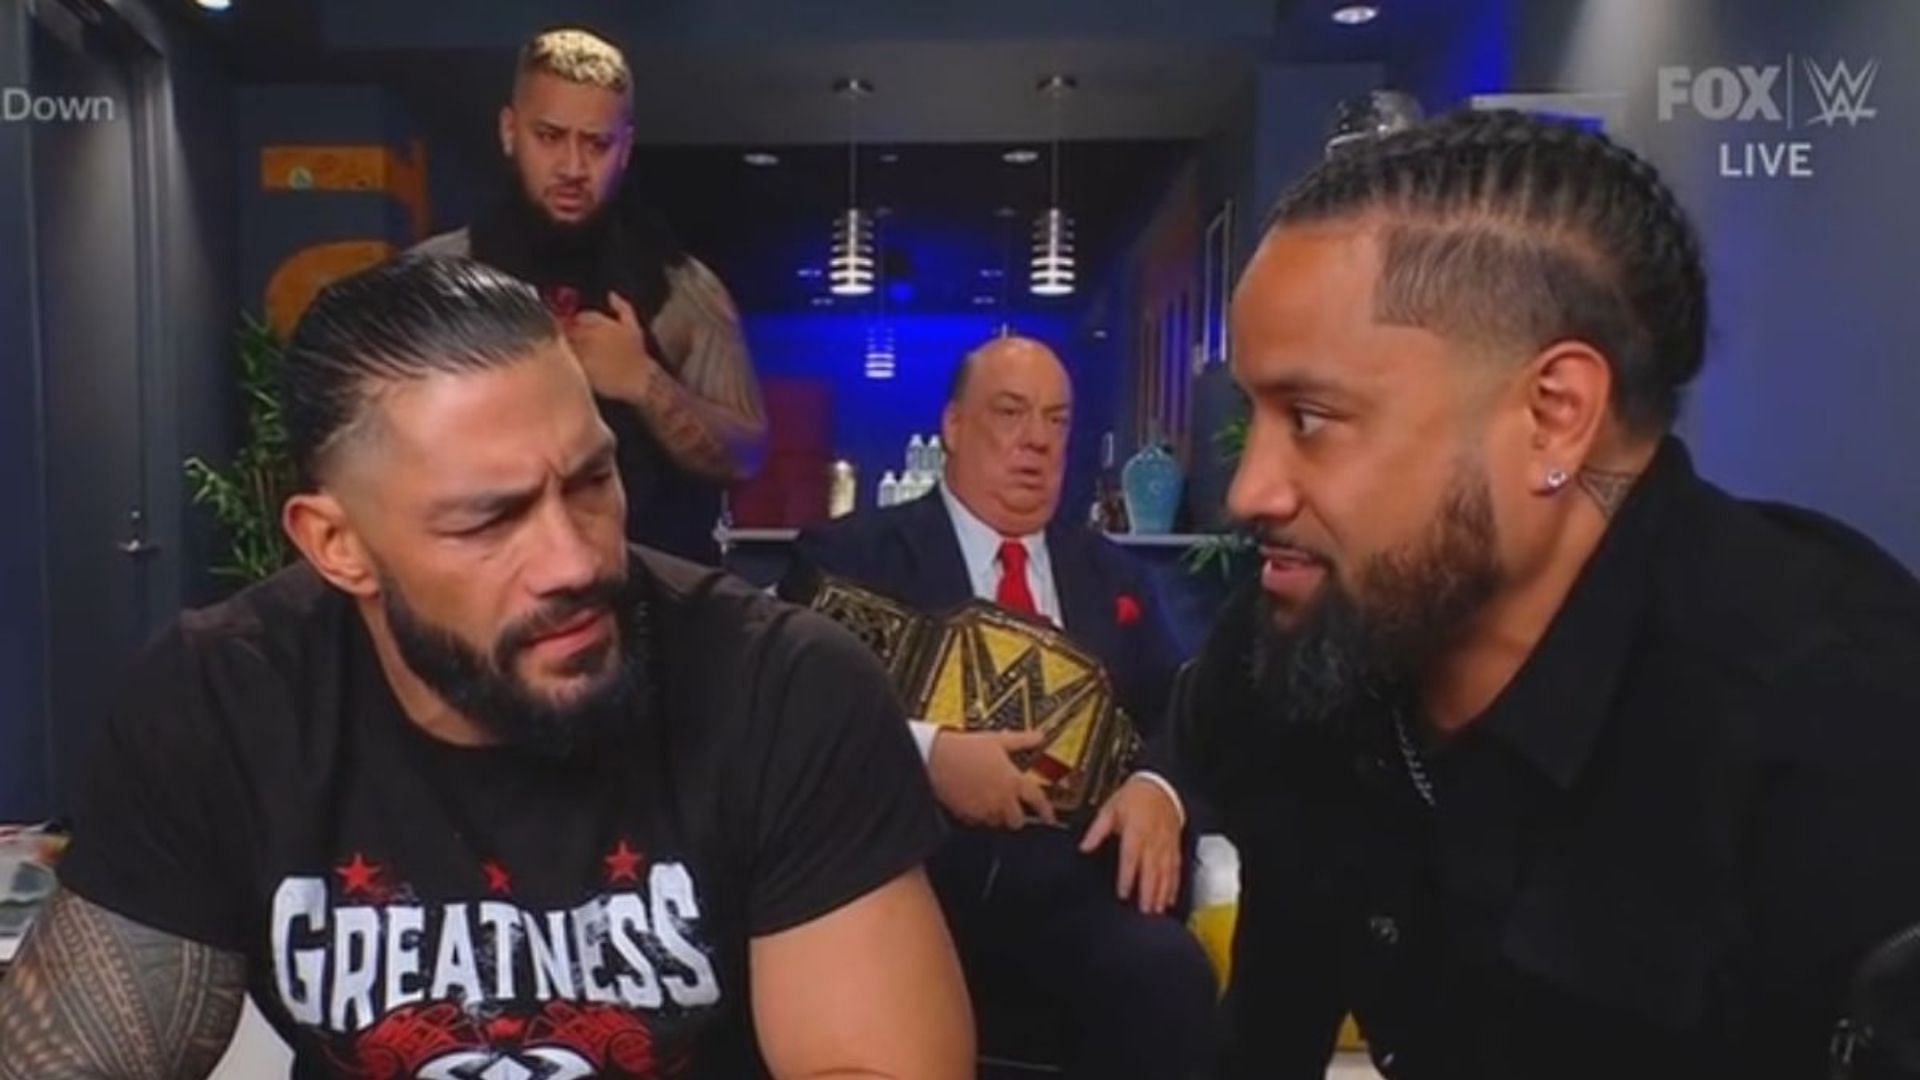 Roman Reigns, Jimmy Uso, Solo Sikoa and Paul Heyman are members of The Bloodline.